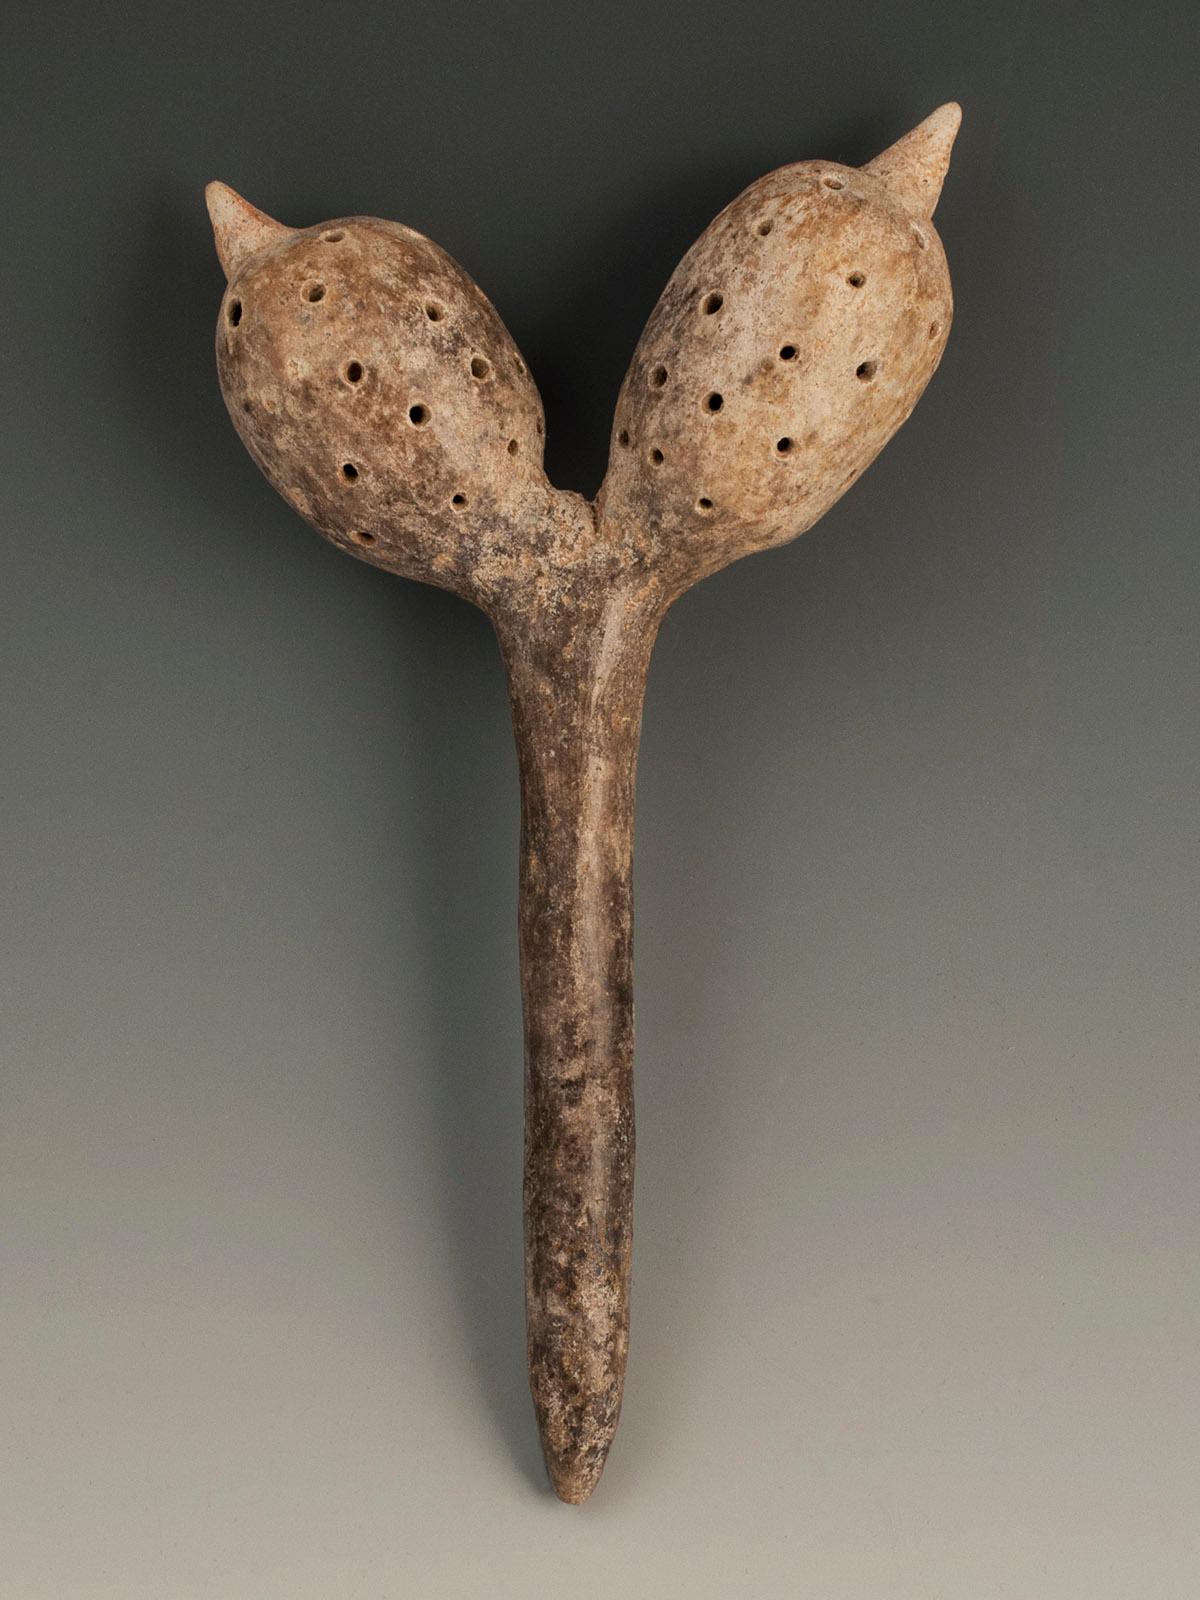 Hand-Crafted Terracotta Rattle, Colima, West Mexico, circa 100 B.C.-250 A.D.